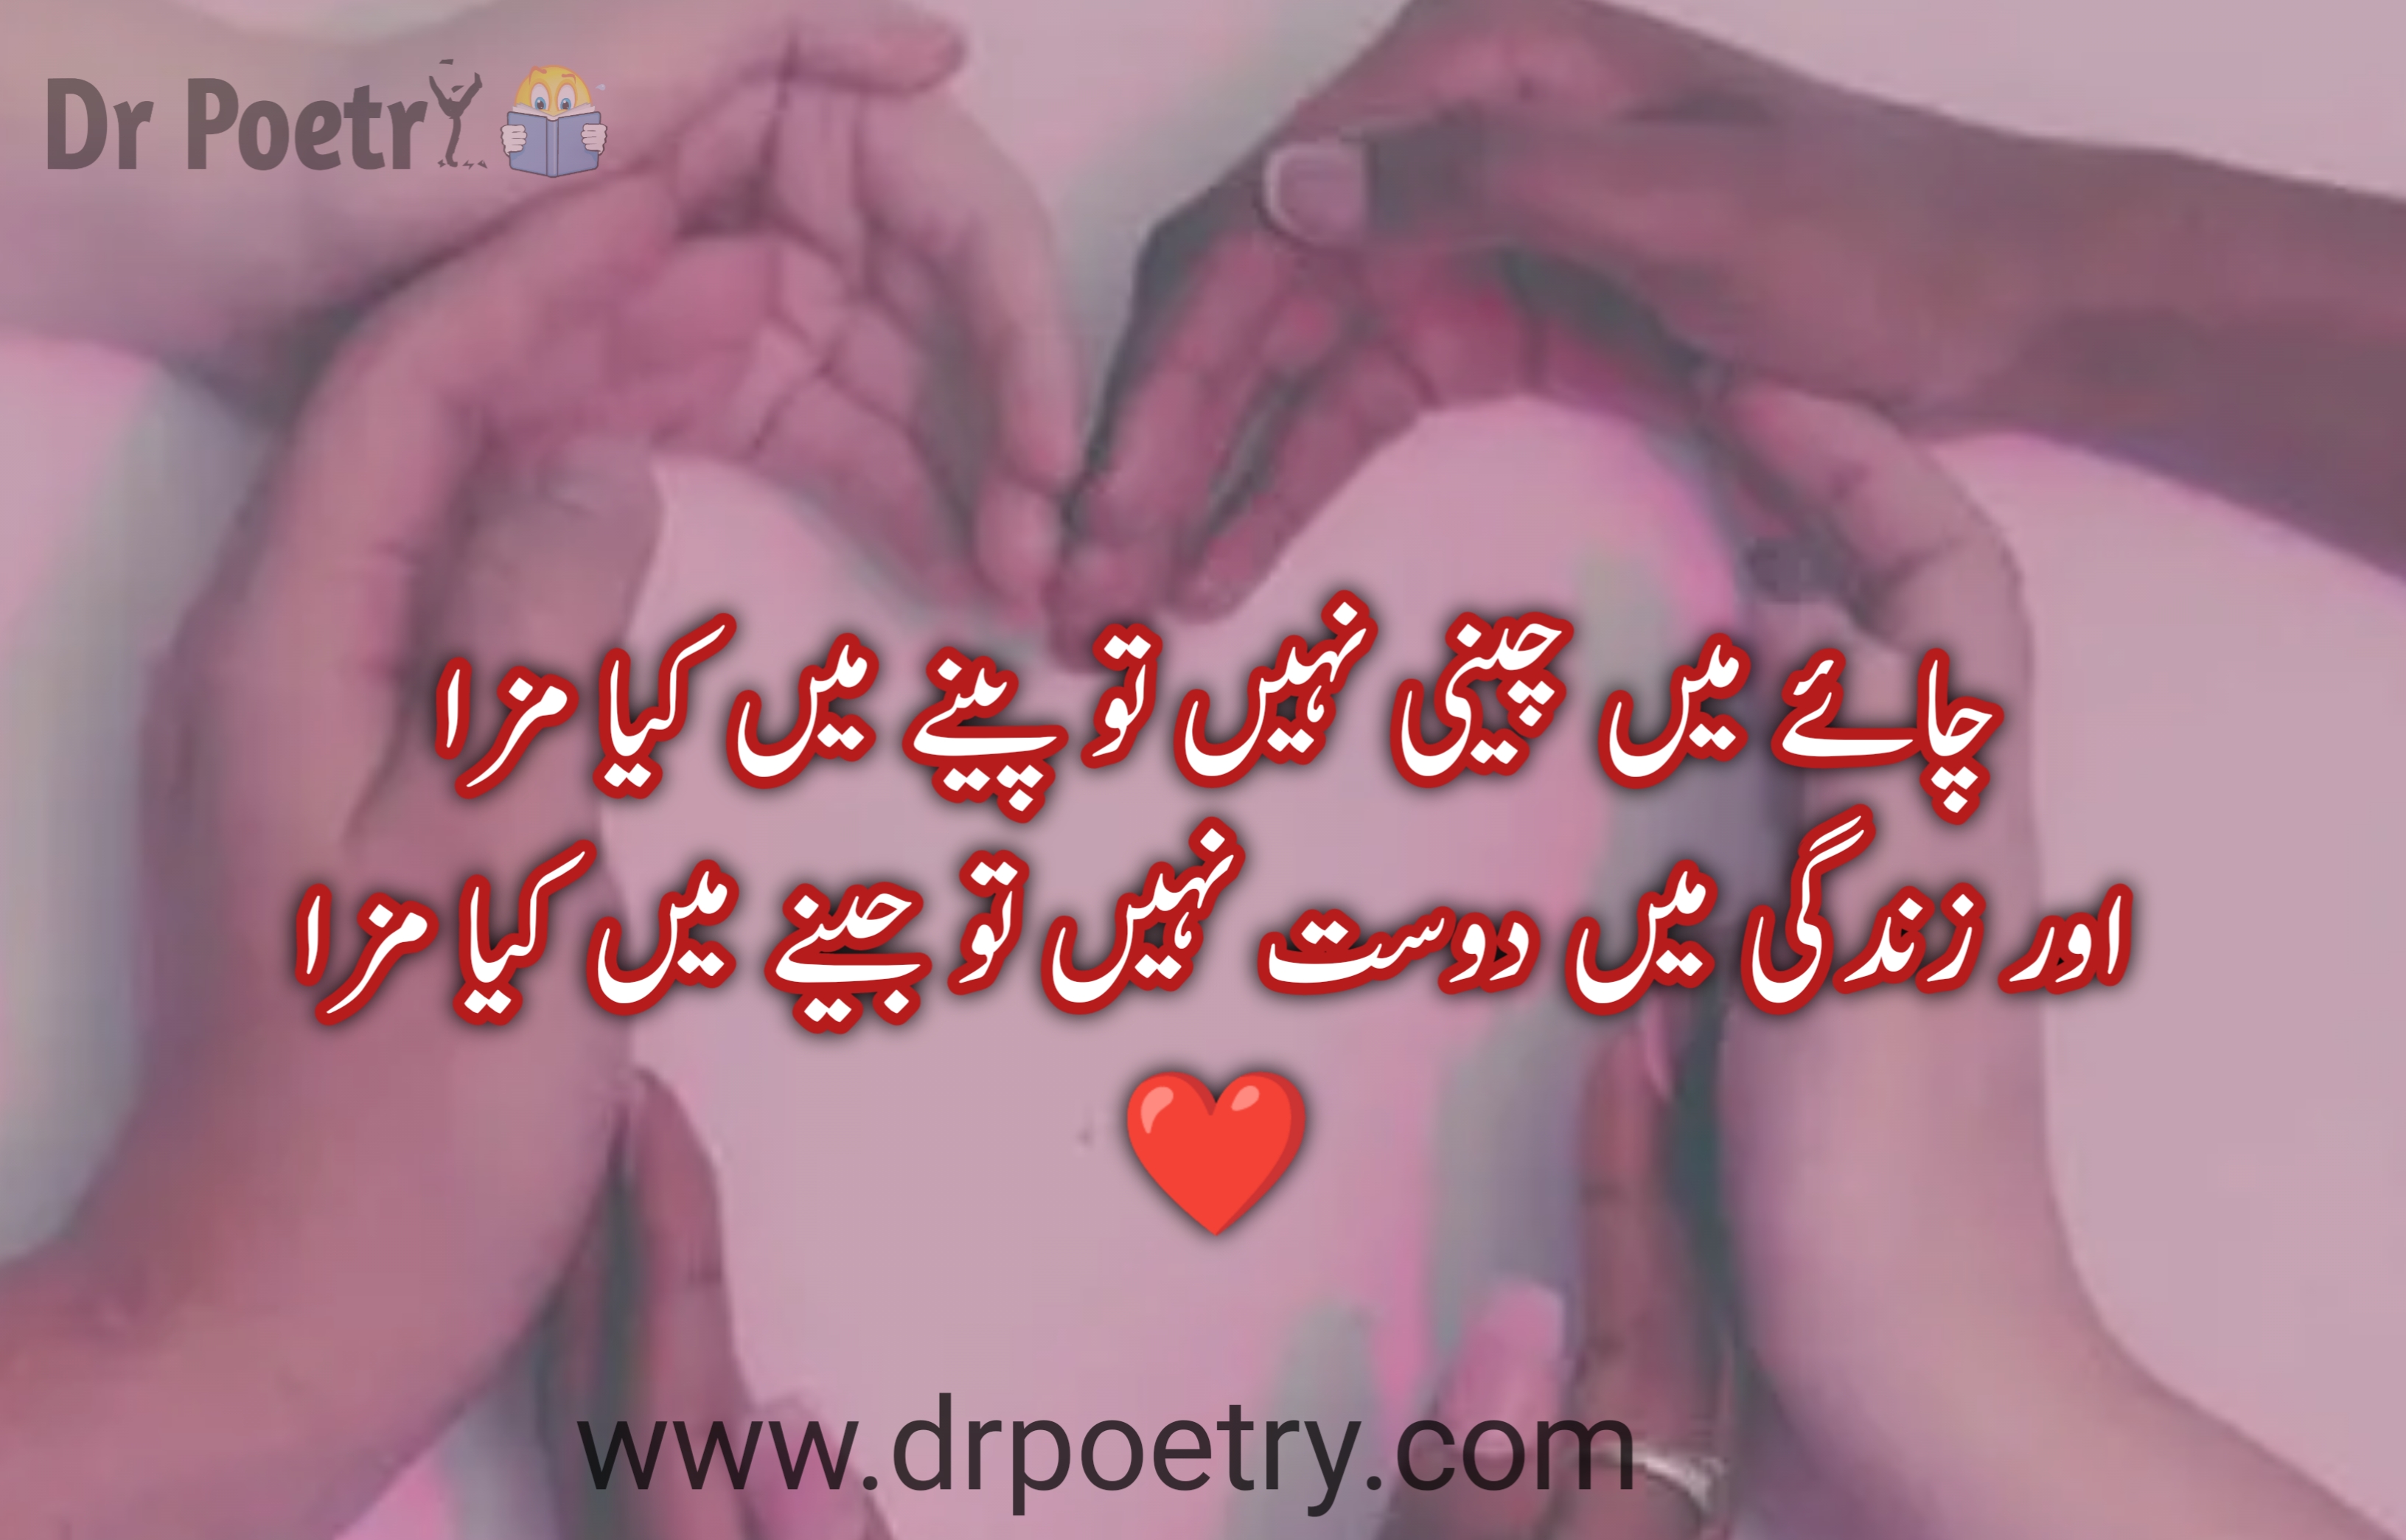 Beautiful Emotional Friendship Day Quotes Dosti Shayari And Suvichar Images  In Hindi | Happy friendship day quotes, Friendship quotes images, Friendship  day quotes